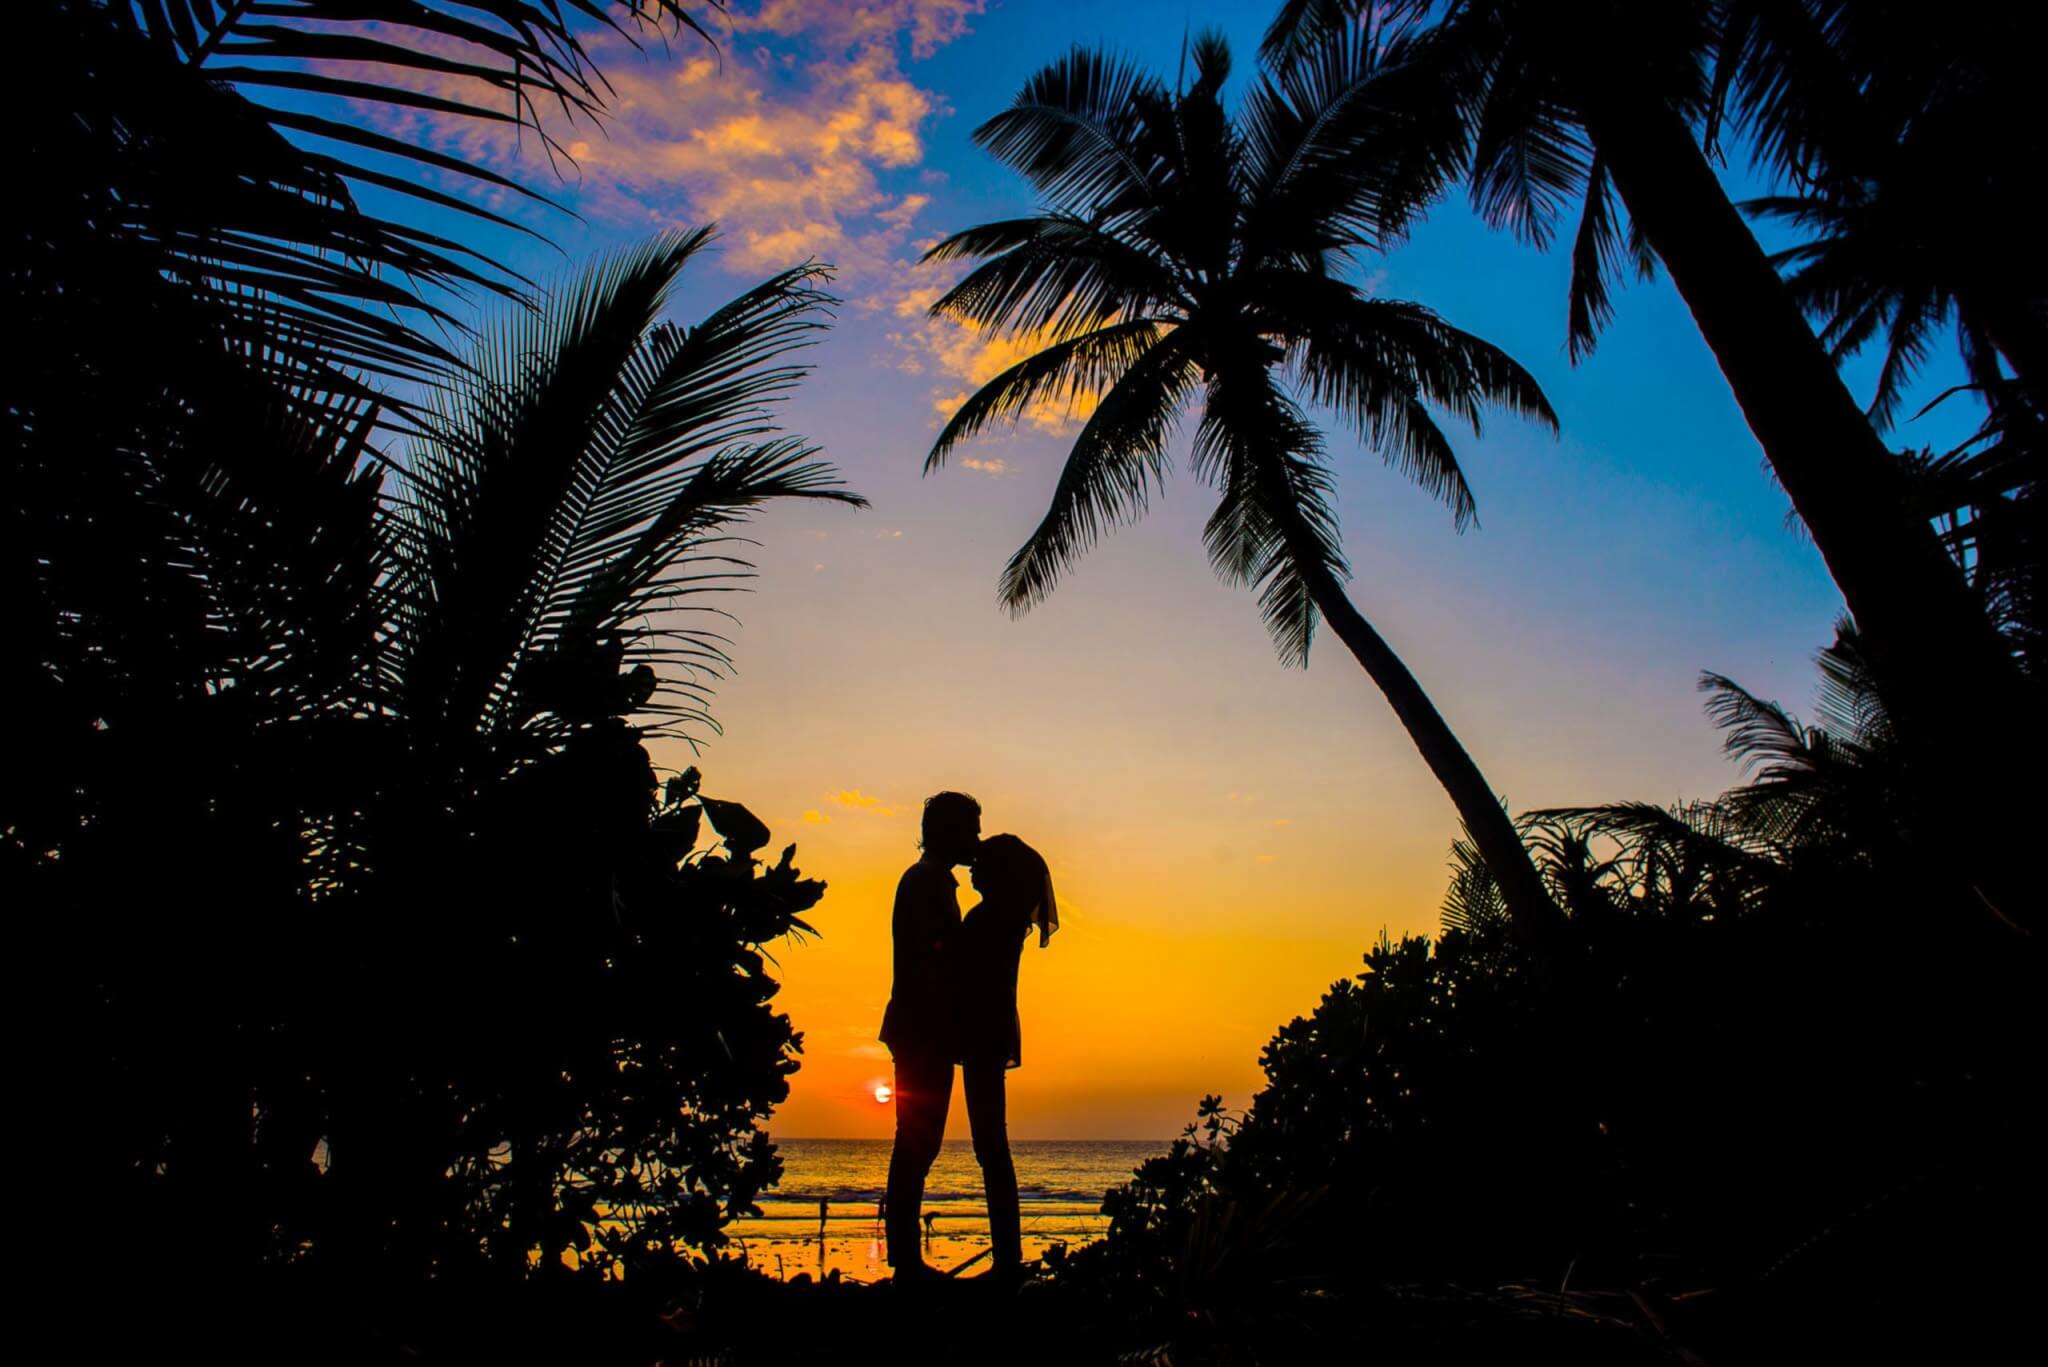 Best U.S. Vacation Spots for Couples in 2023: Top 5 Romantic Trips According to Travel Experts